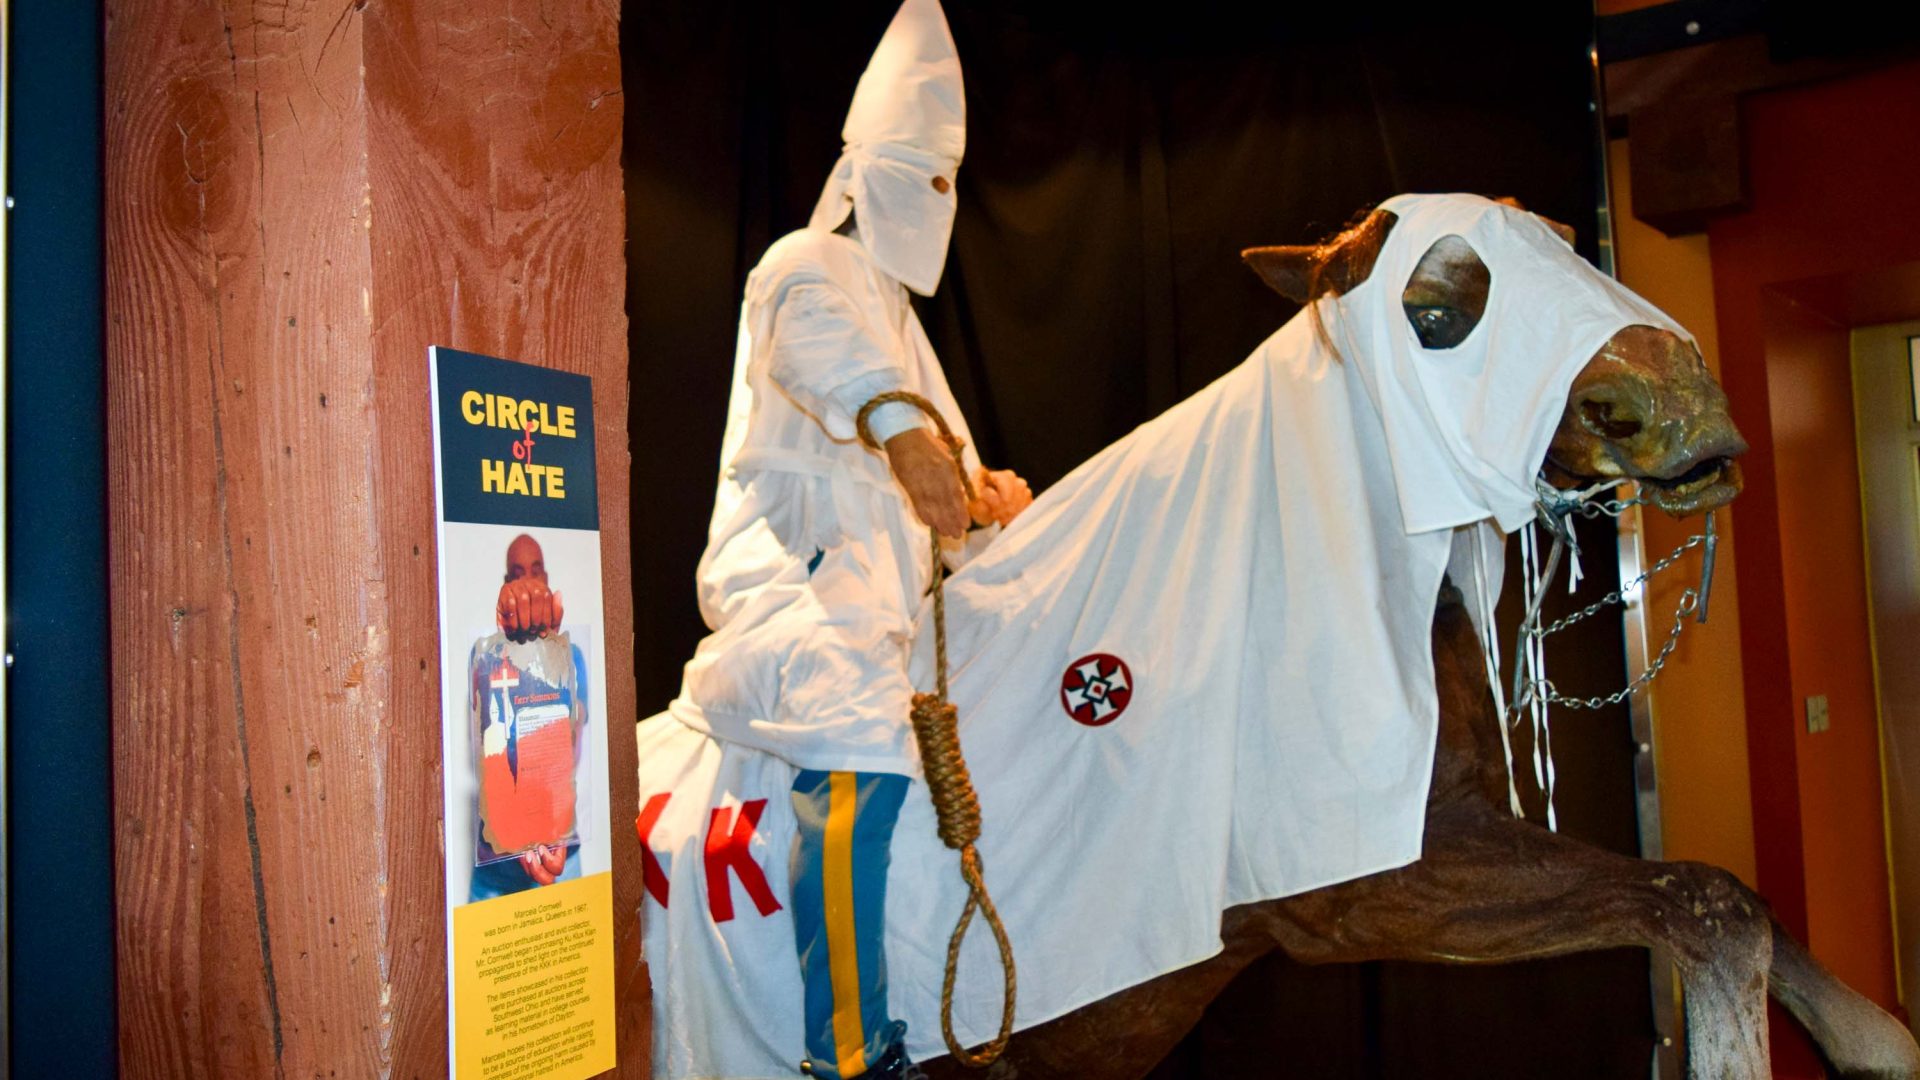 A Ku Klux Klan statue in the Circle of Hate room.